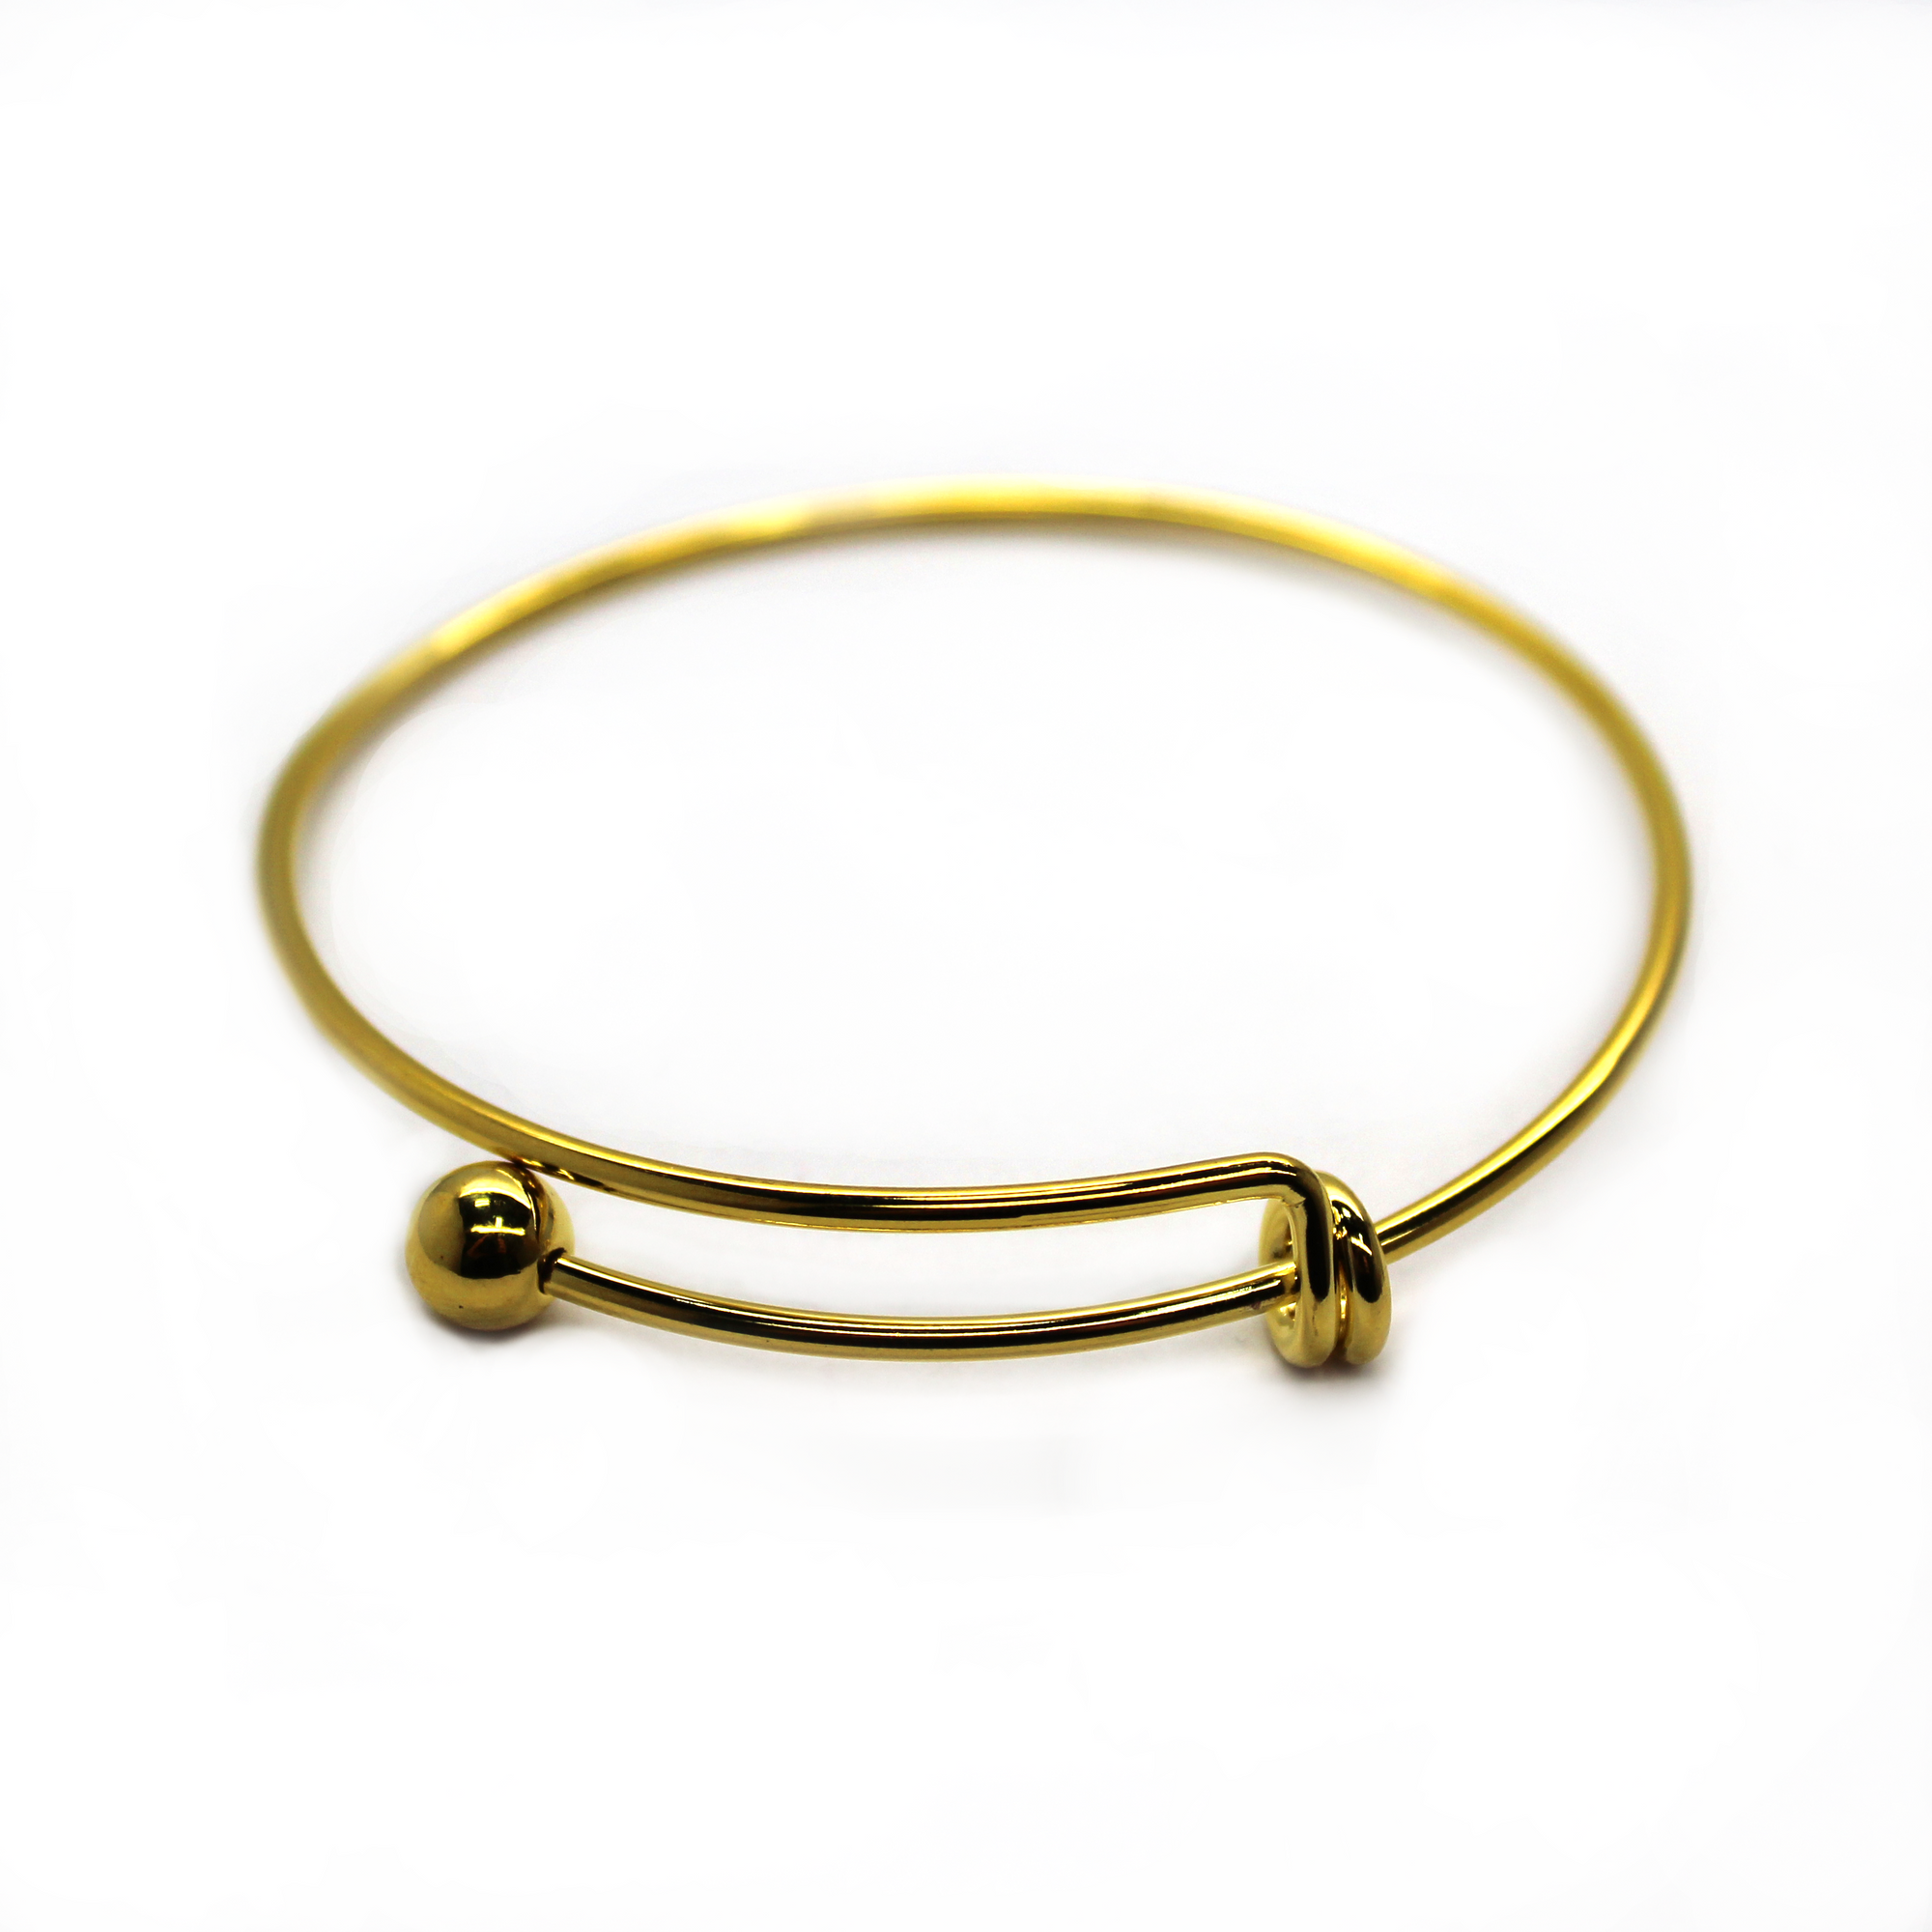 Adjustable Charm Bangle - Gold Alloy - 1pc - Butterfly Beads